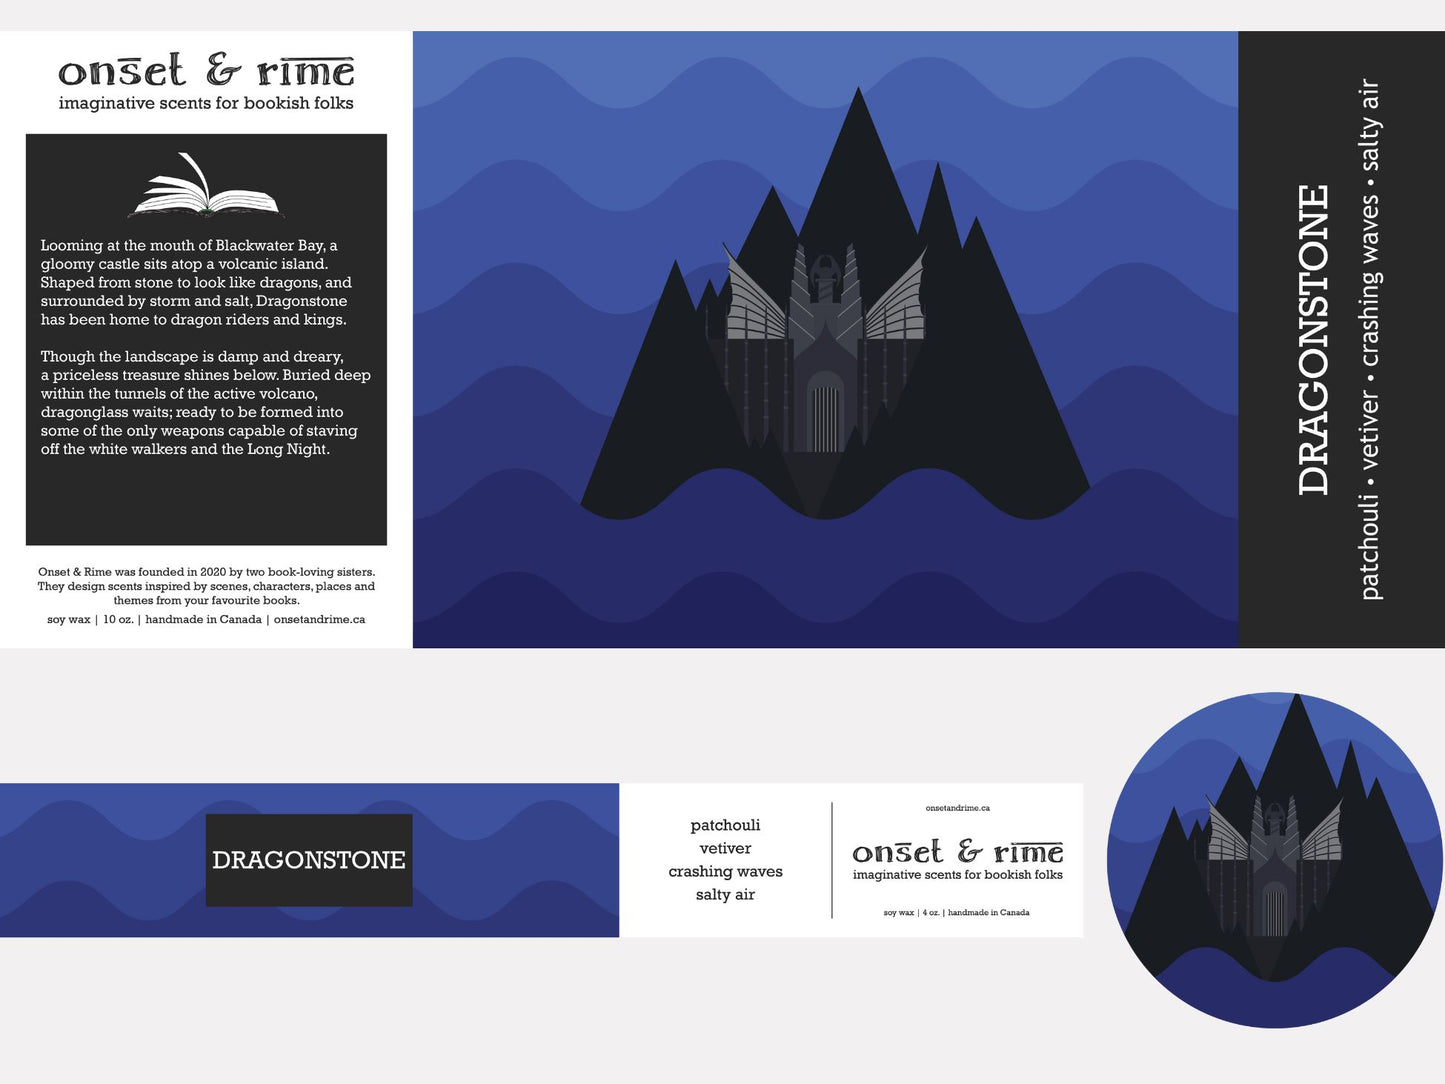 A close up view of the label for the Onset & Rime chilly island scented candle called "Dragonstone". The label has blue waves in the background with a volcanic island and castle. The text on the label is "Dragonstone - Patchouli, Vetiver, Crashing Waves, Salty Air".